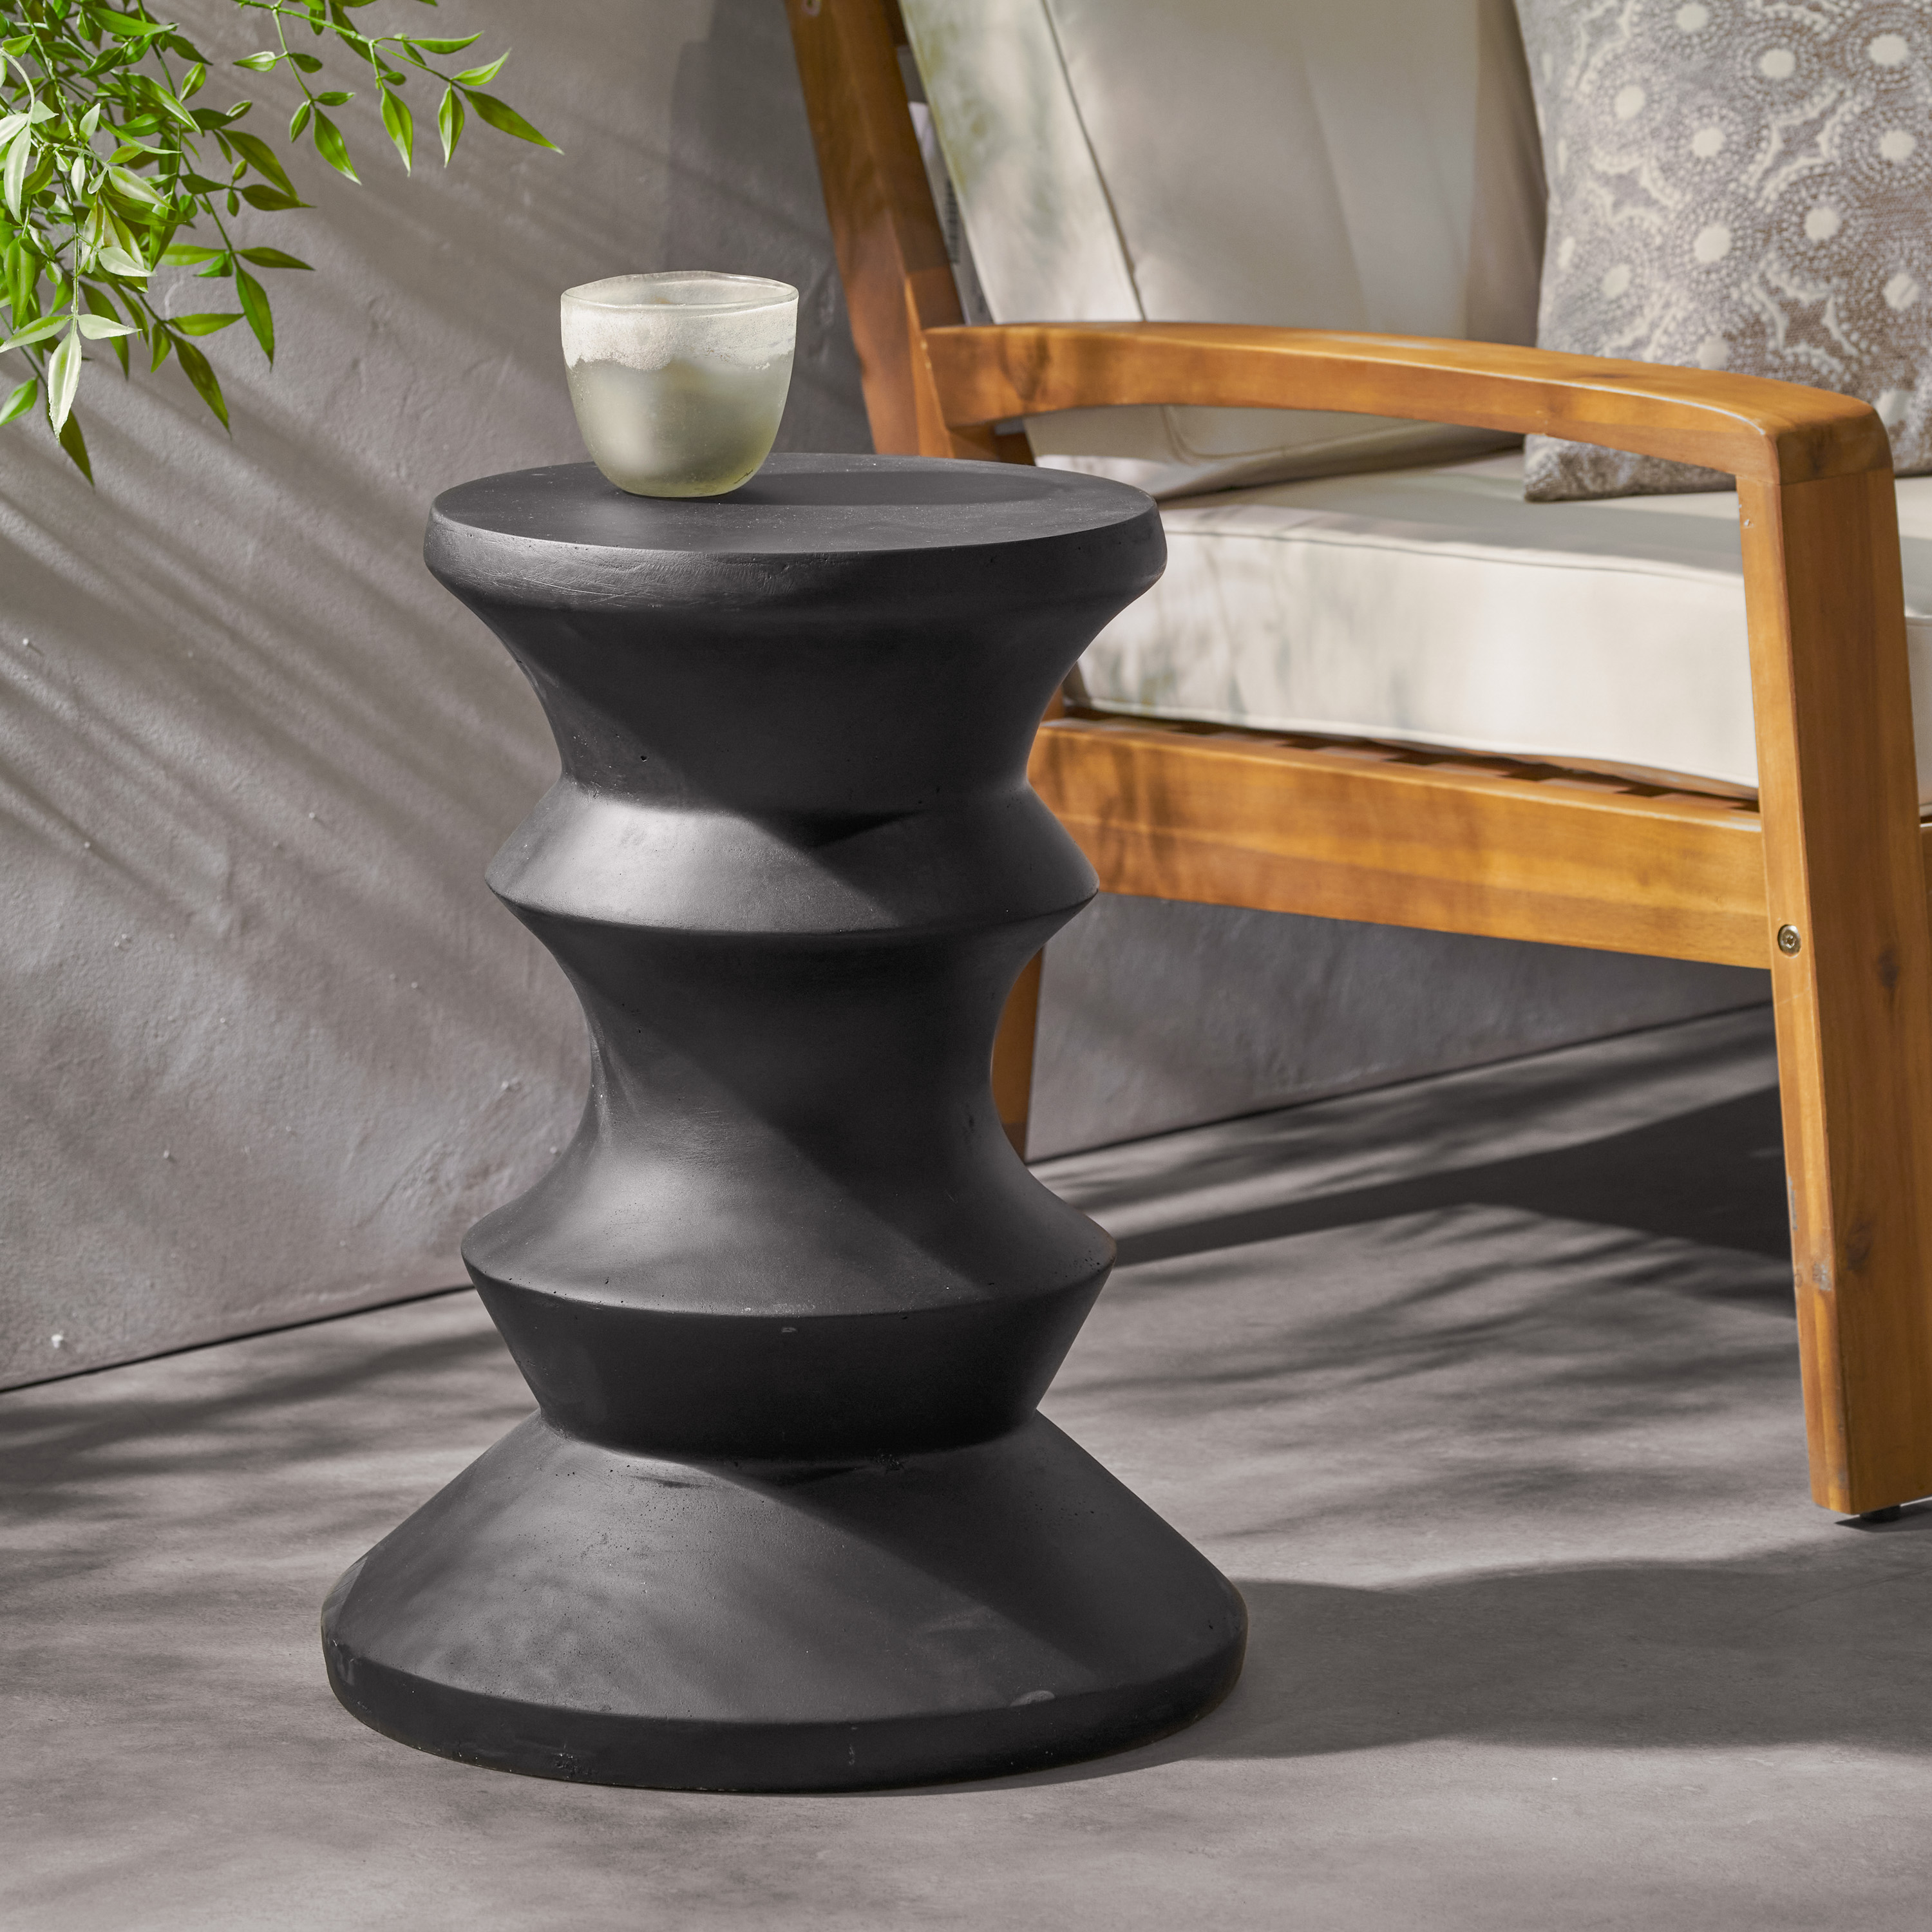 Outdoor 22" Light-Weight Concrete Side Table, Black - image 1 of 8